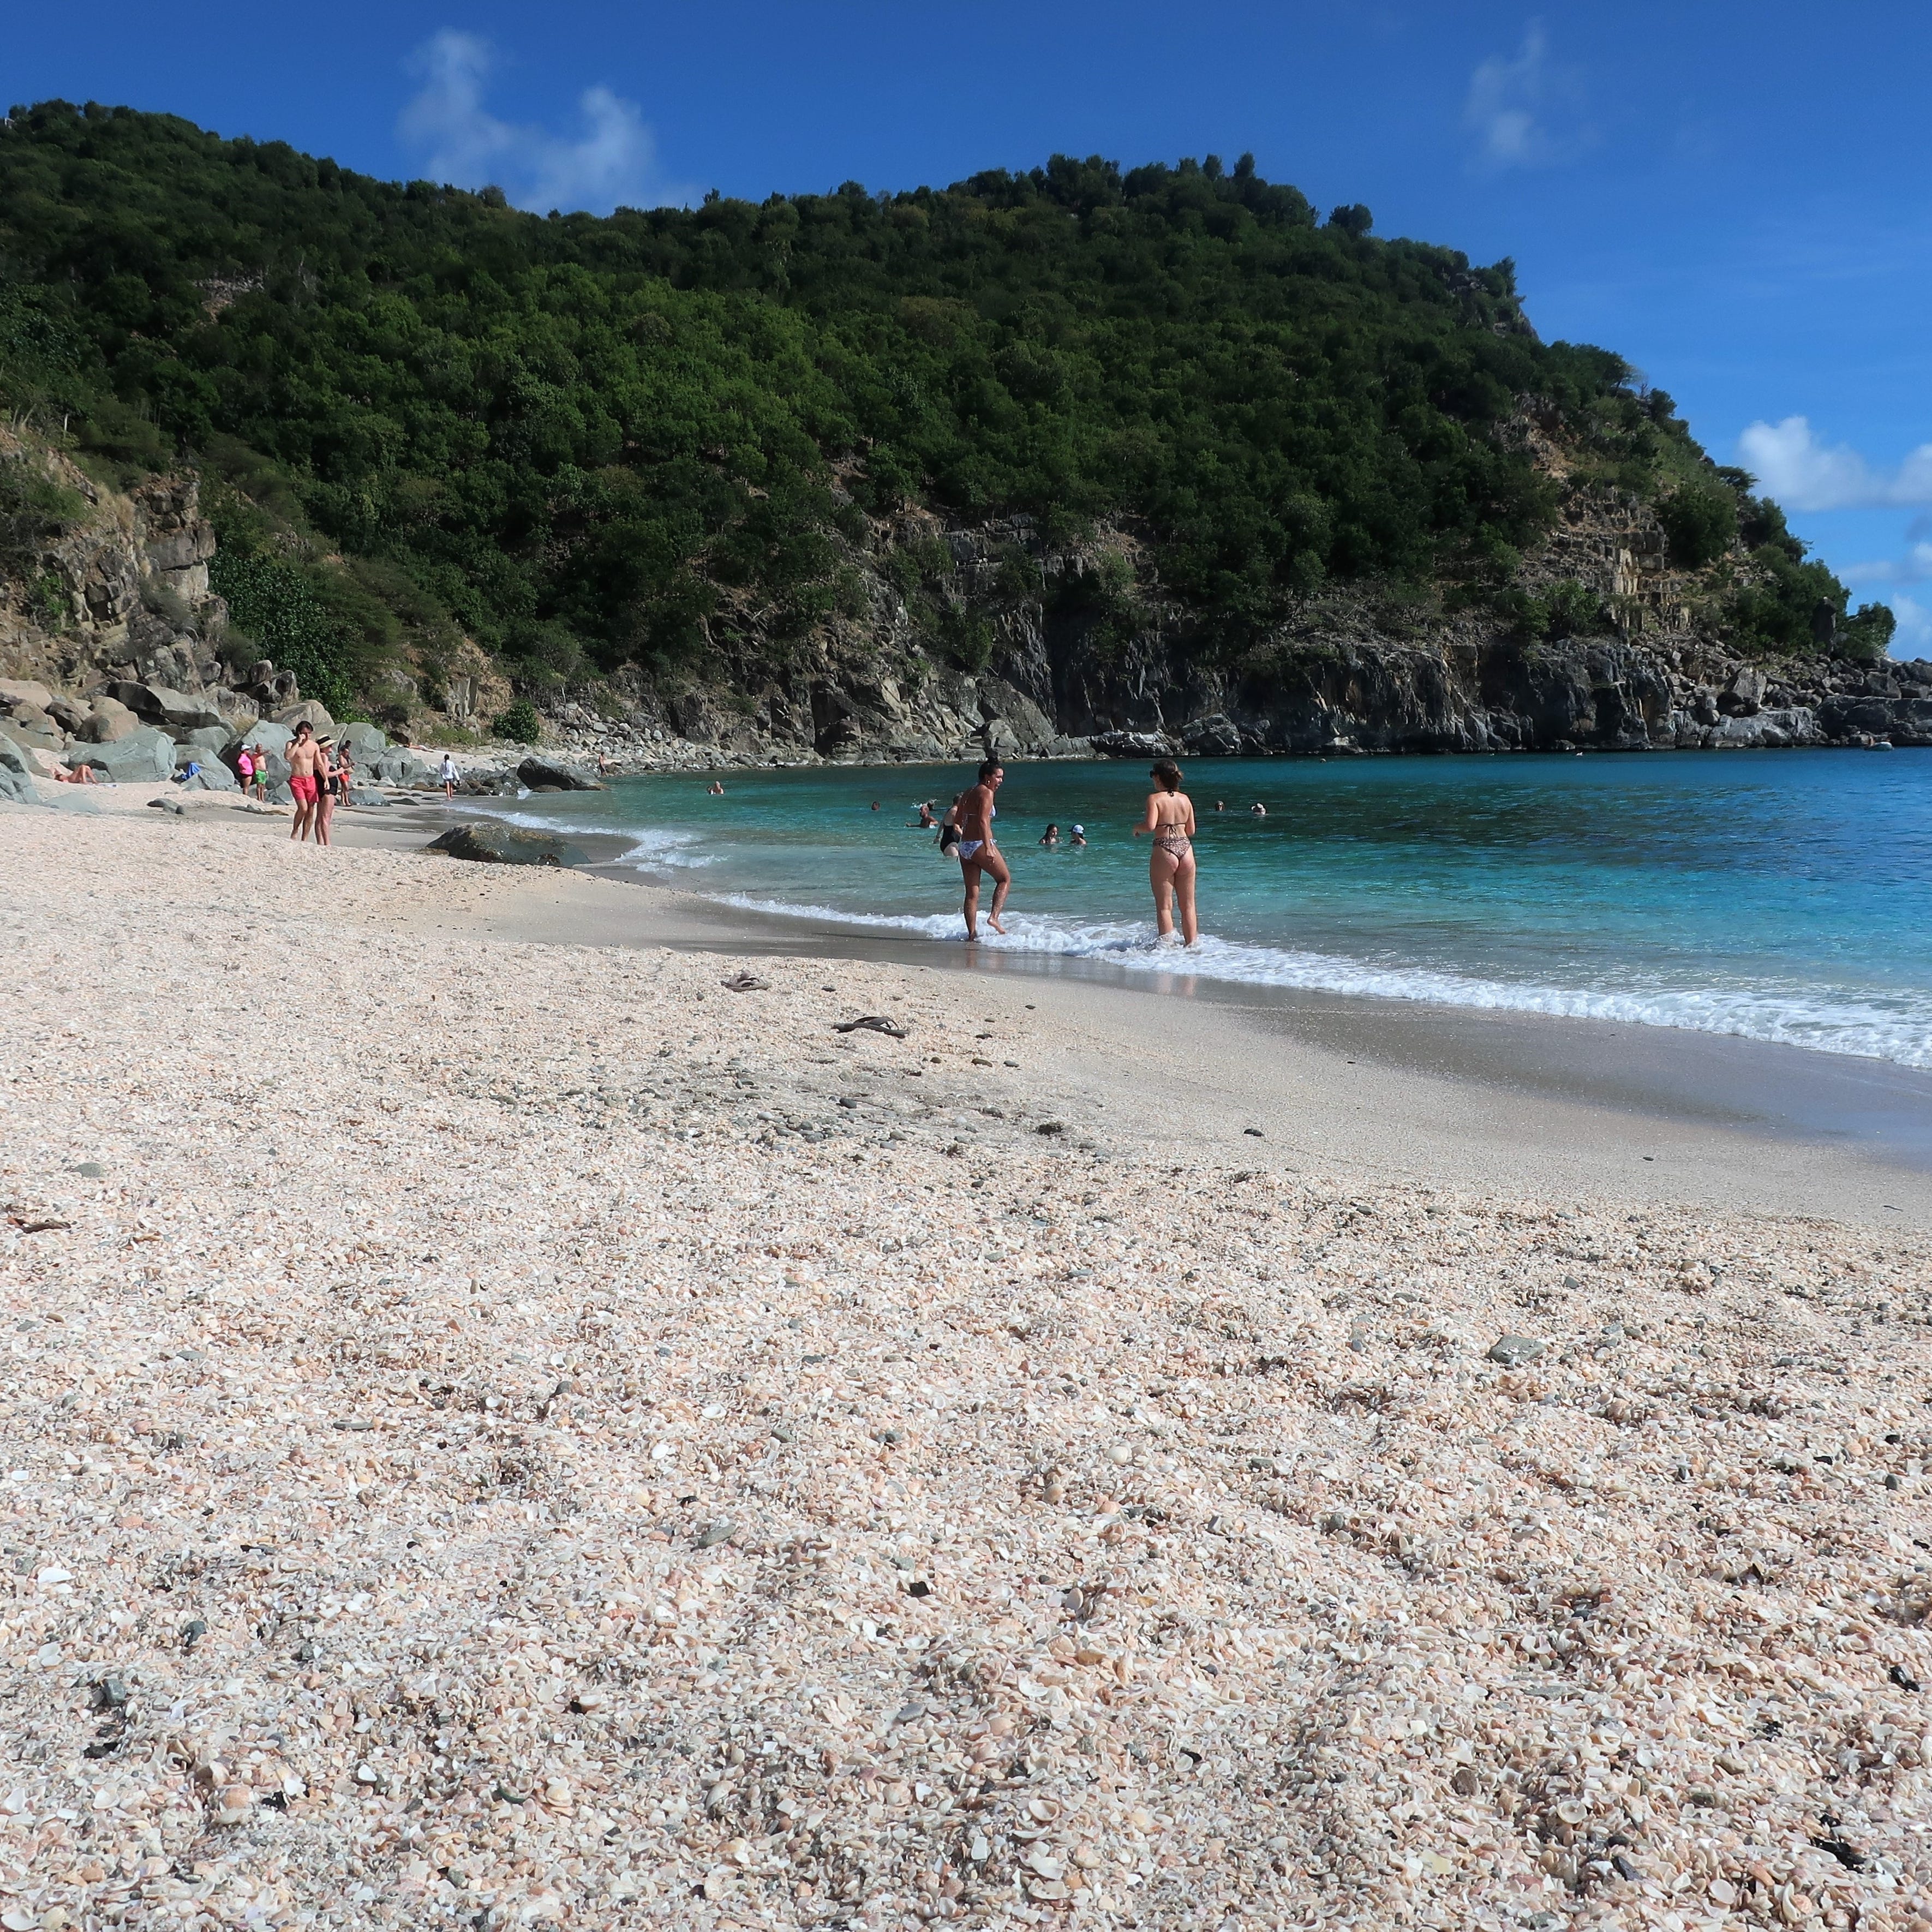 Shell Beach, just a short walk from downtown Gustavia, St. Barts, is so named because the beach's sand is mixed with millions of tiny seashells.